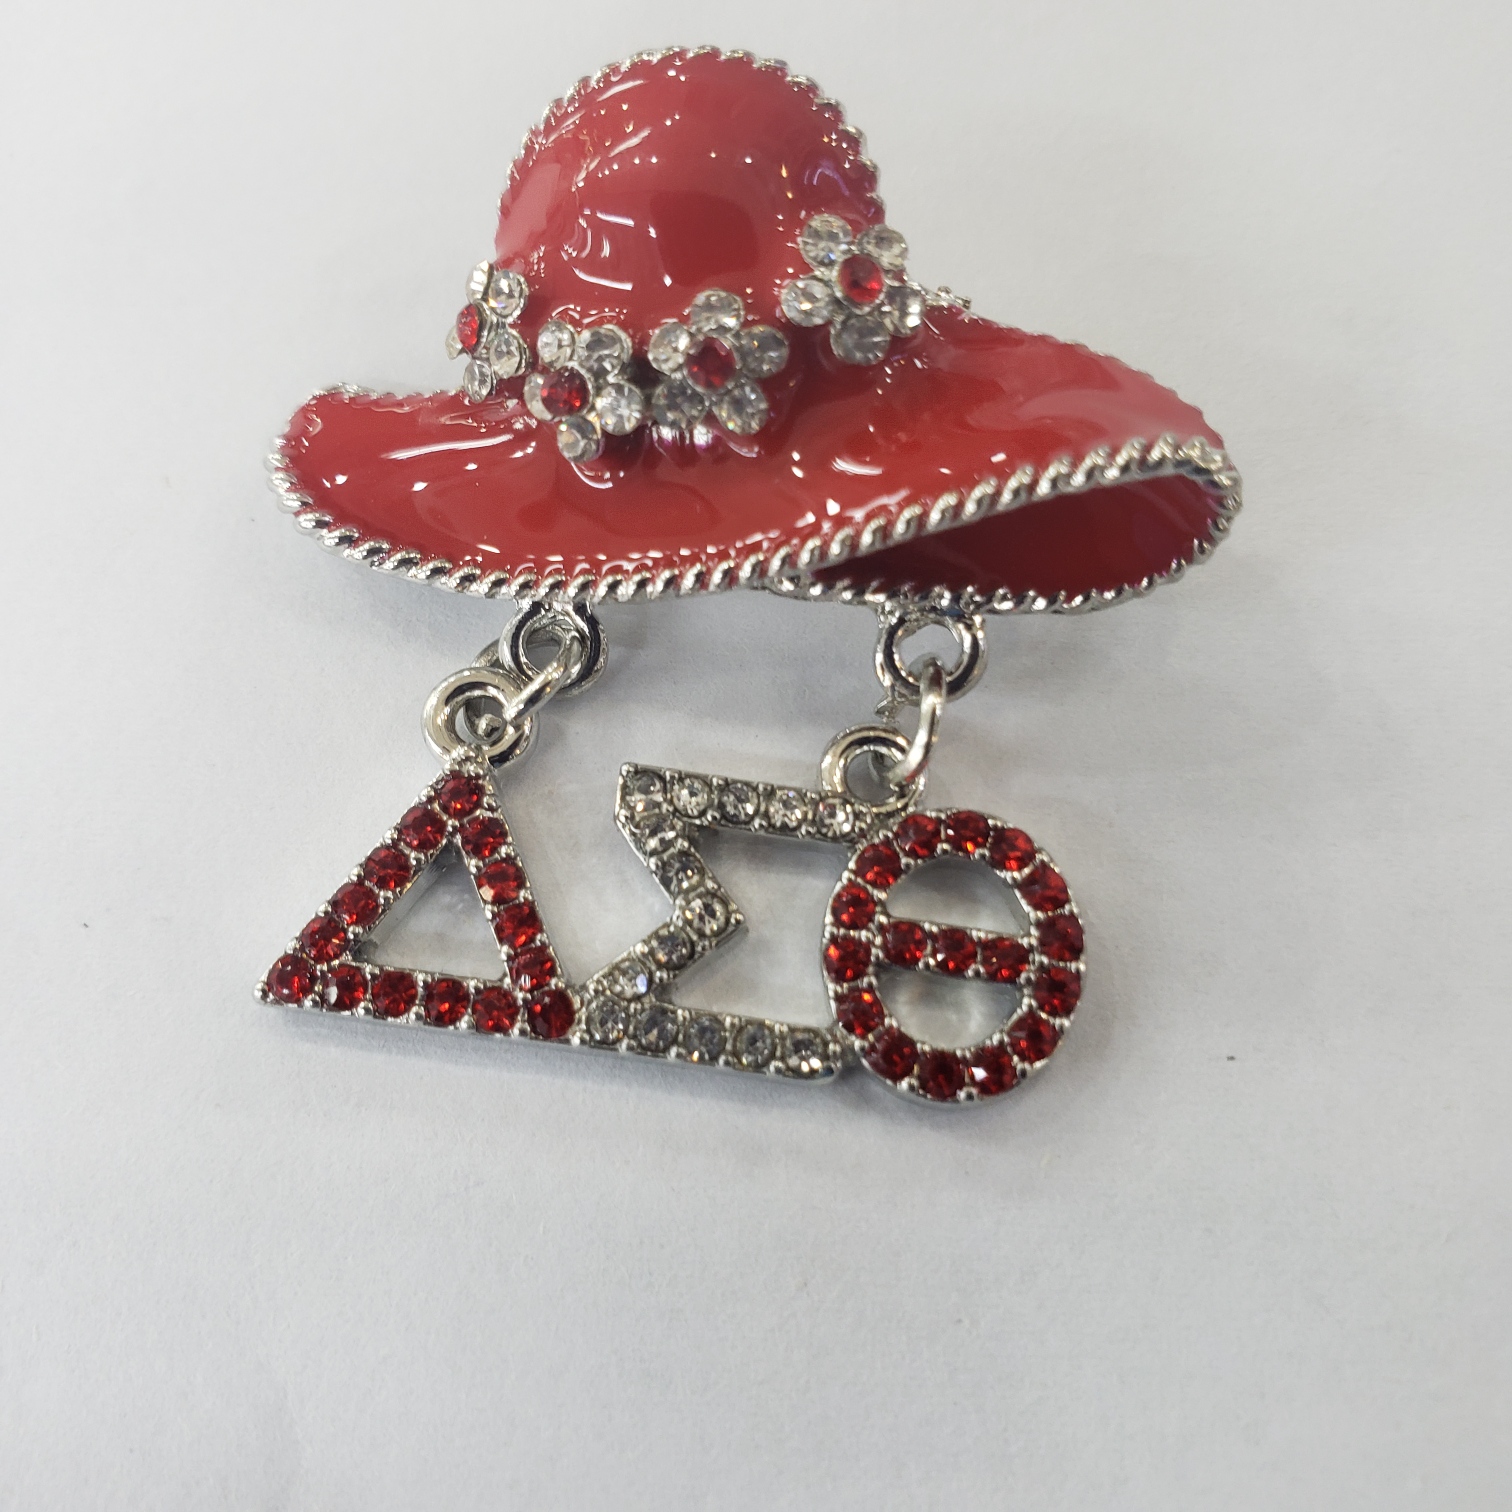 Pin red hat